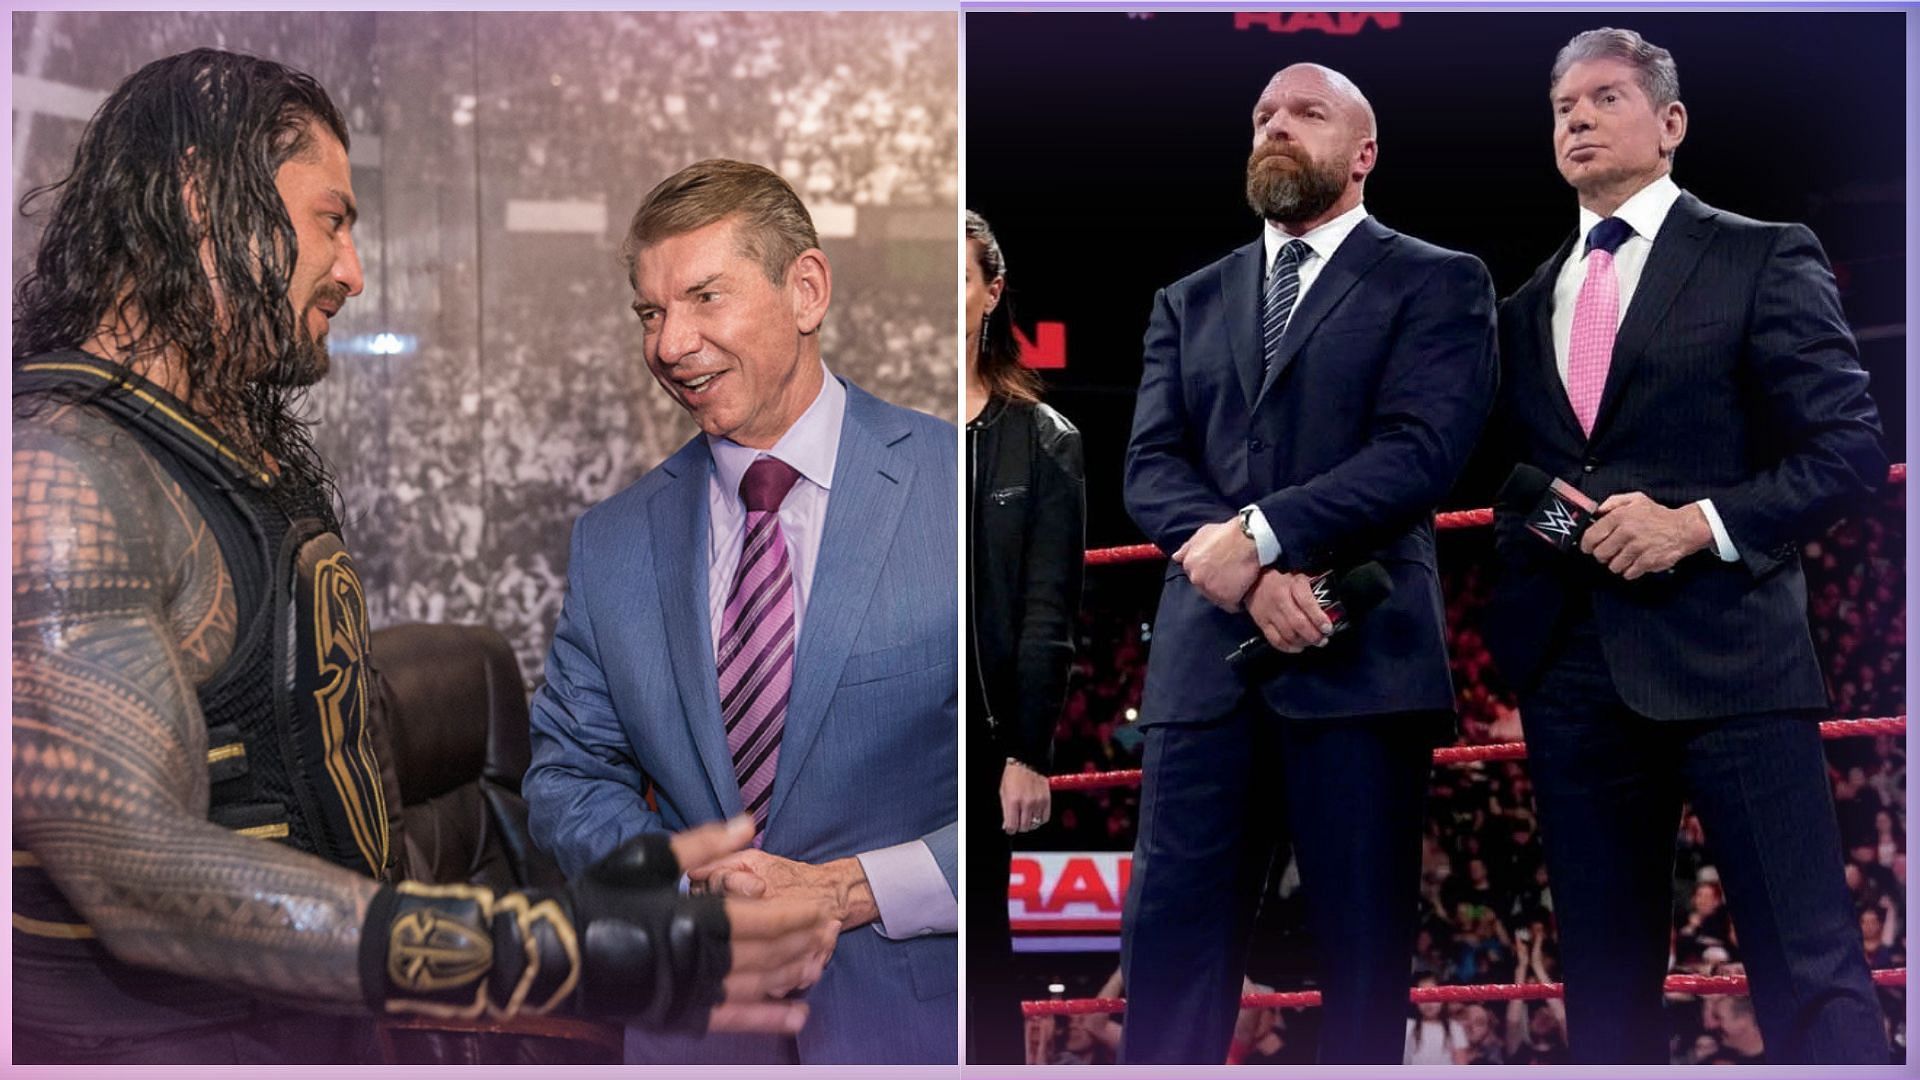 WWE Superstar Roman Reigns, former Chairman Vince McMahon, and current Head of Creative Triple H